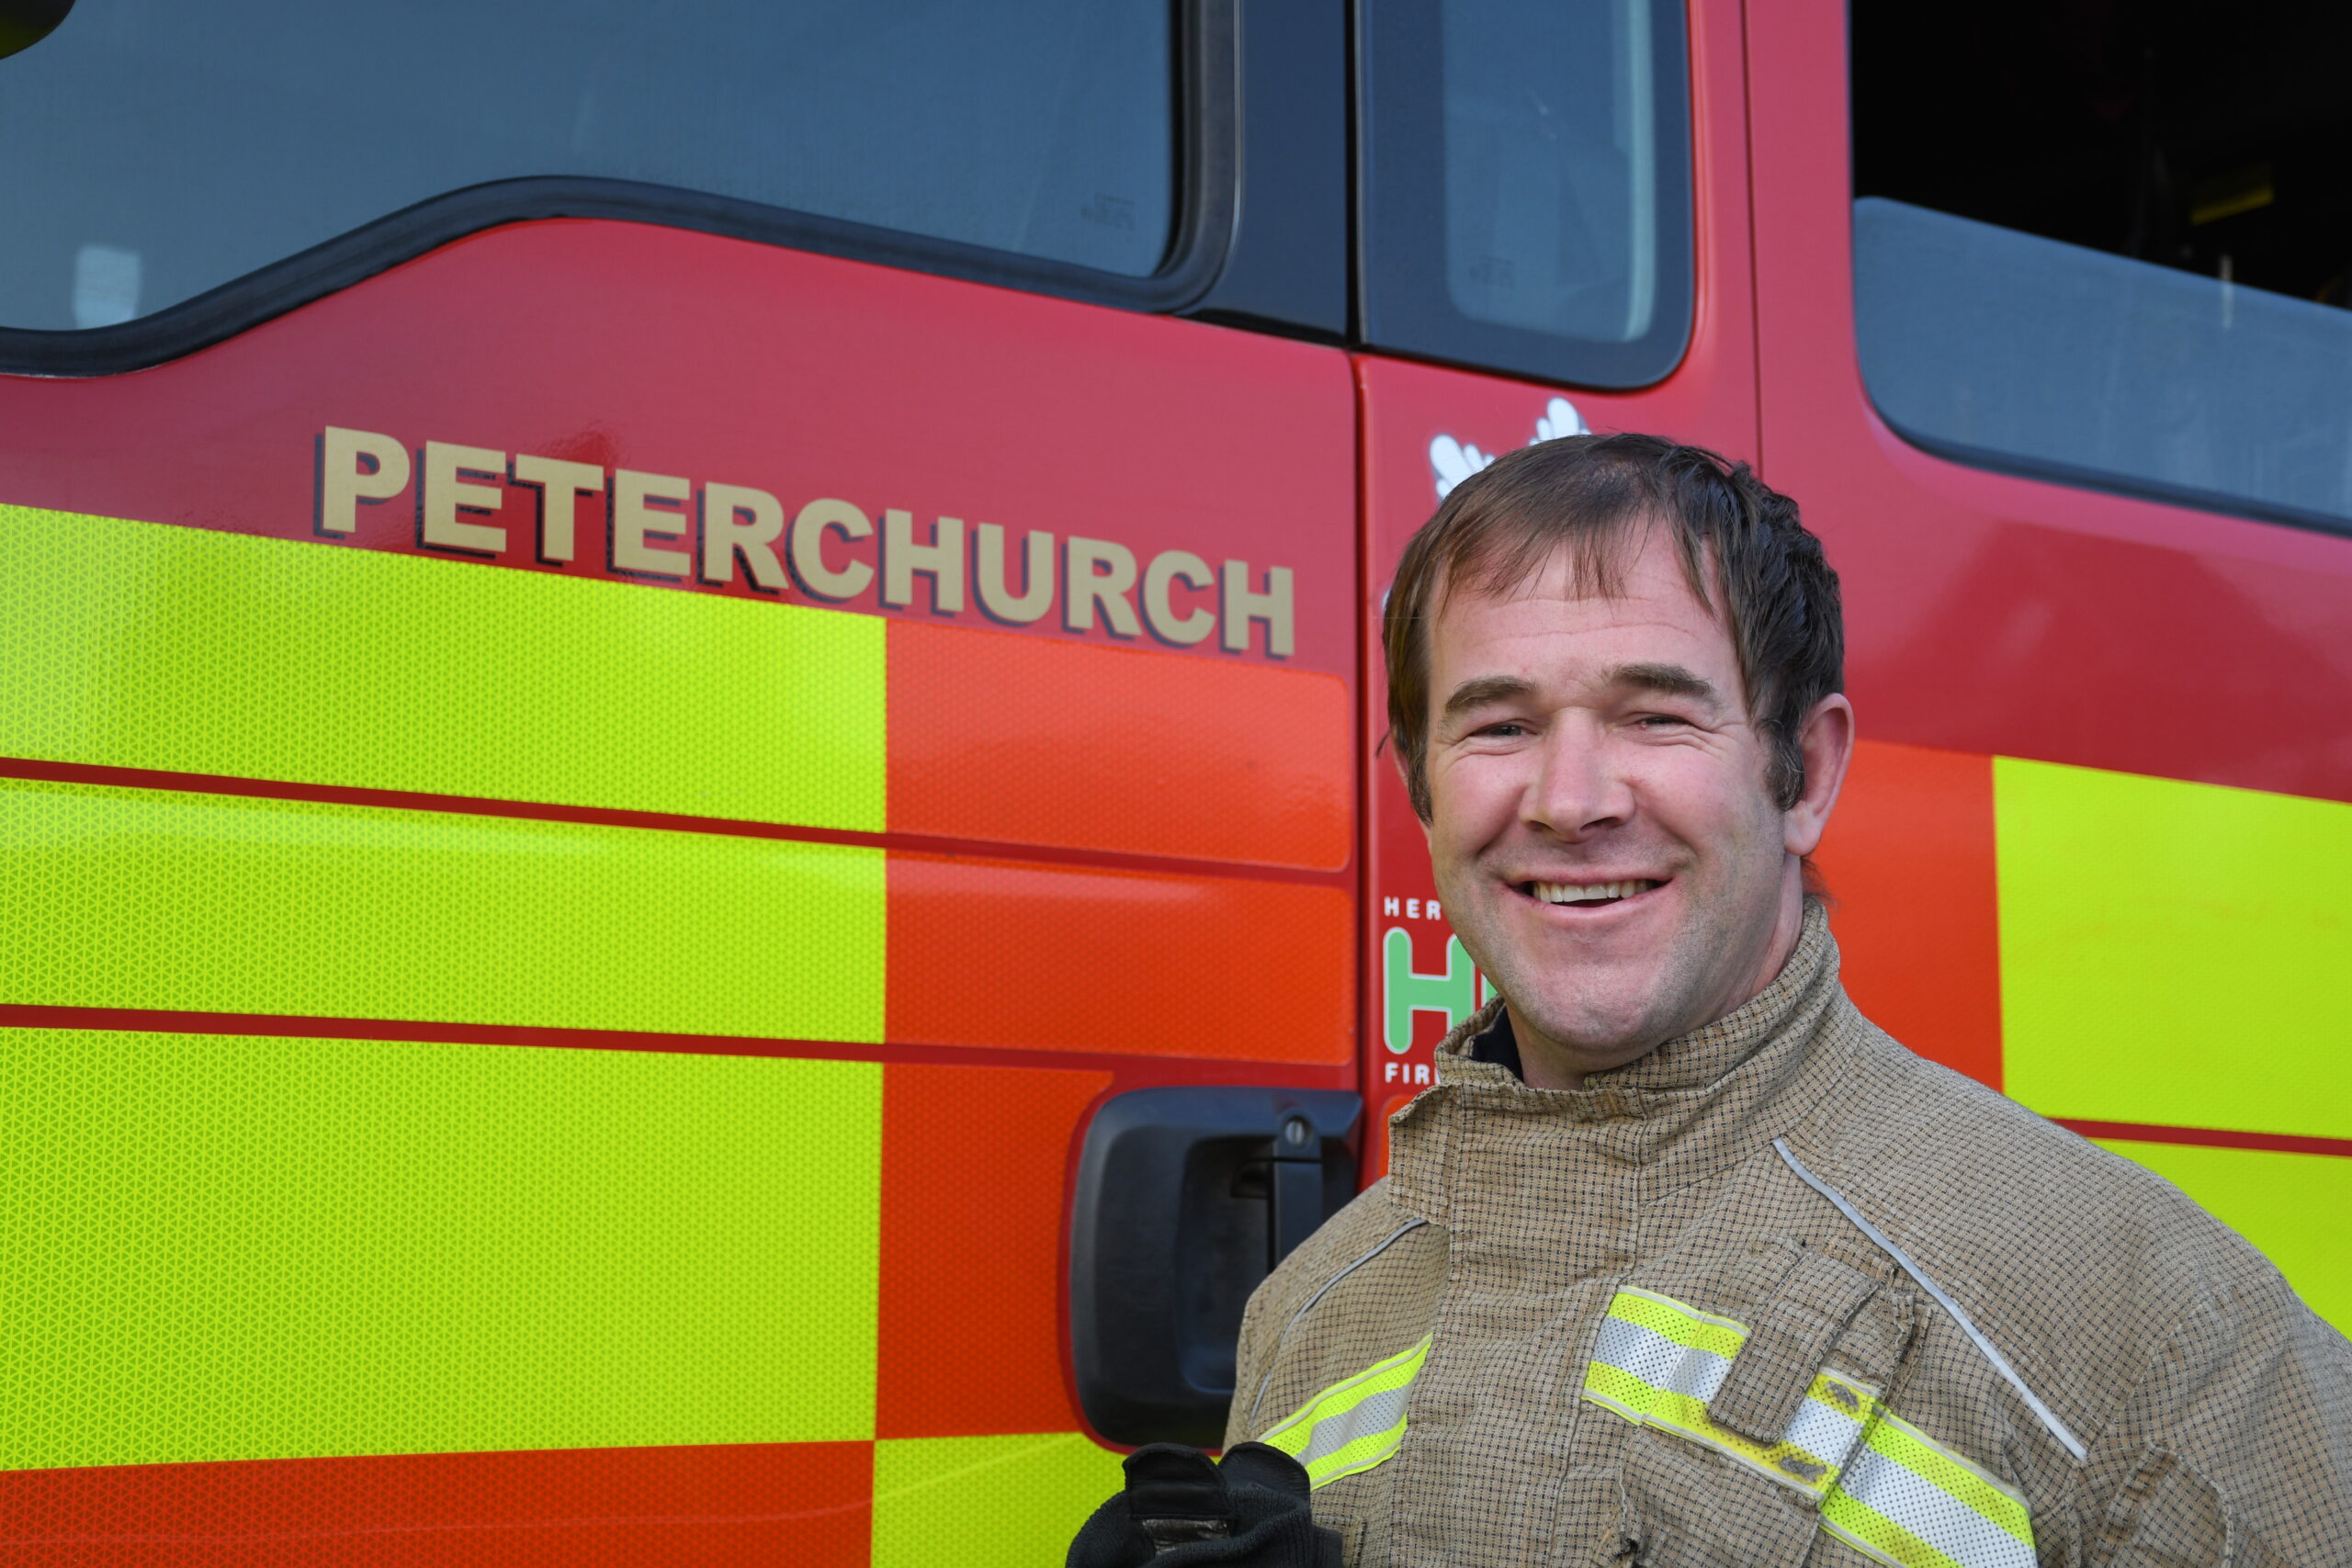 Firefighter standing to the side of a fire engine from Peterchurch.